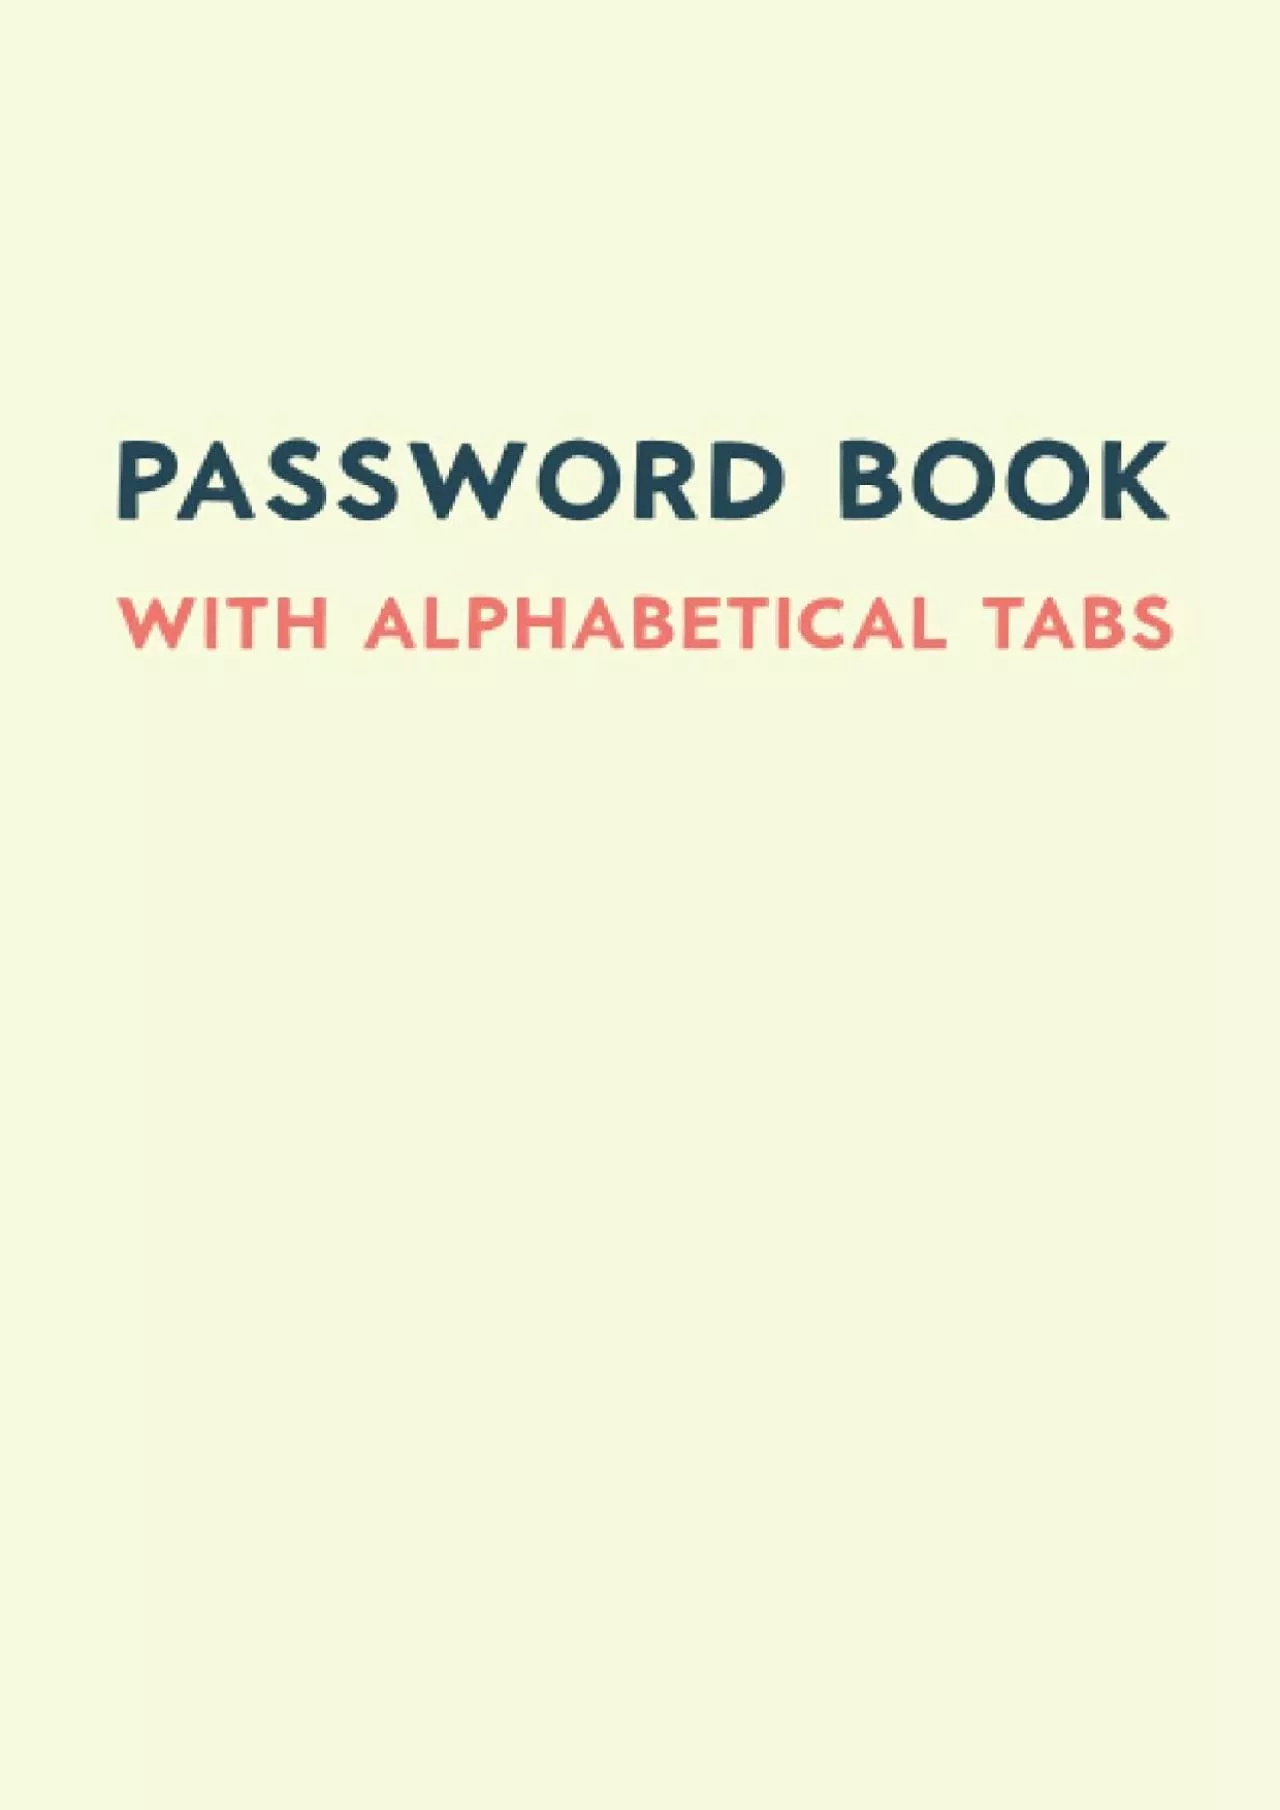 [eBOOK]-Password Book With Alphabetical Tabs: Pocket Size 5.5x8.5 Password Notebook Keeper